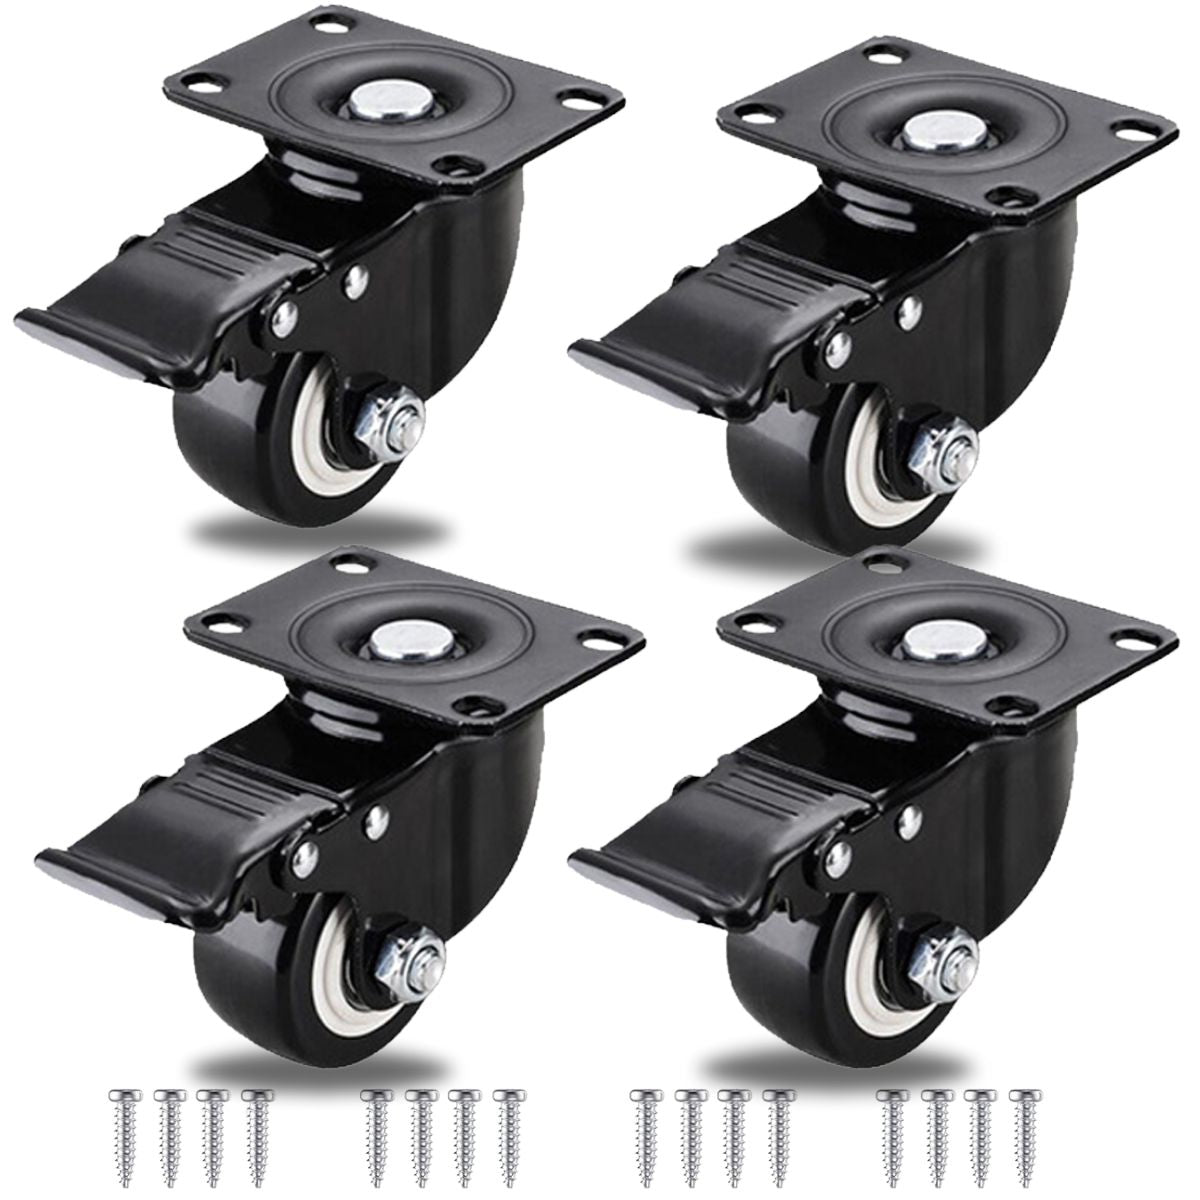 TovaHaus Heavy Duty Swivel Castor Wheels Trolley 50mm up to 200KG - Pack of 4 No Floor Marks Silent Caster for Furniture - Rubbered Trolley Wheels - TovaHaus